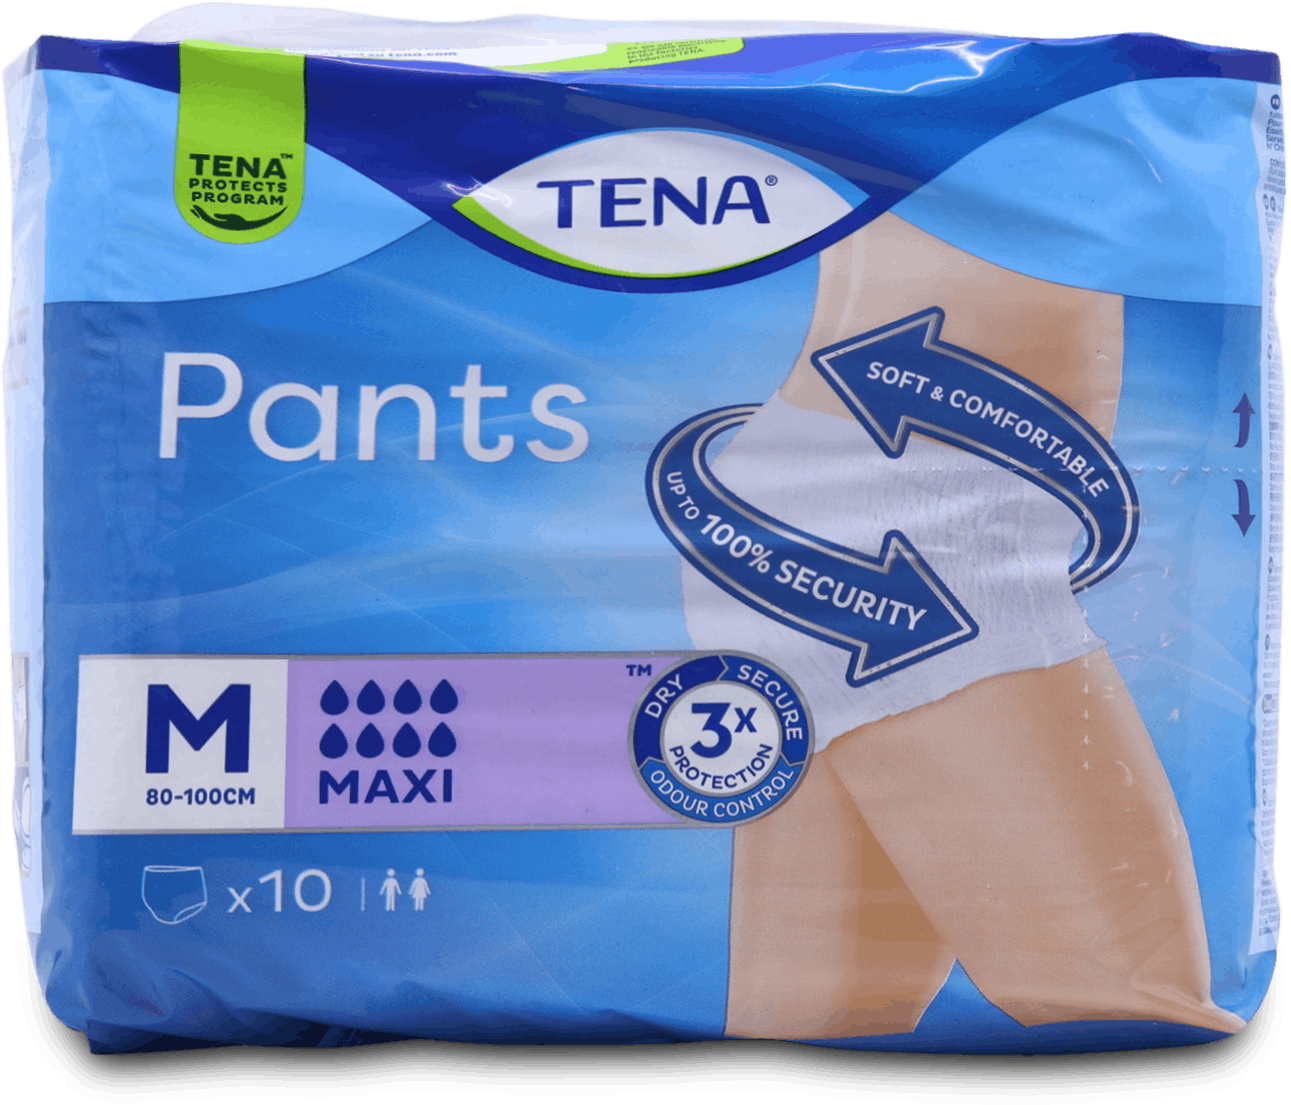 TENA Lady Maxi Night Incontinence Pads 12 per pack | British Online